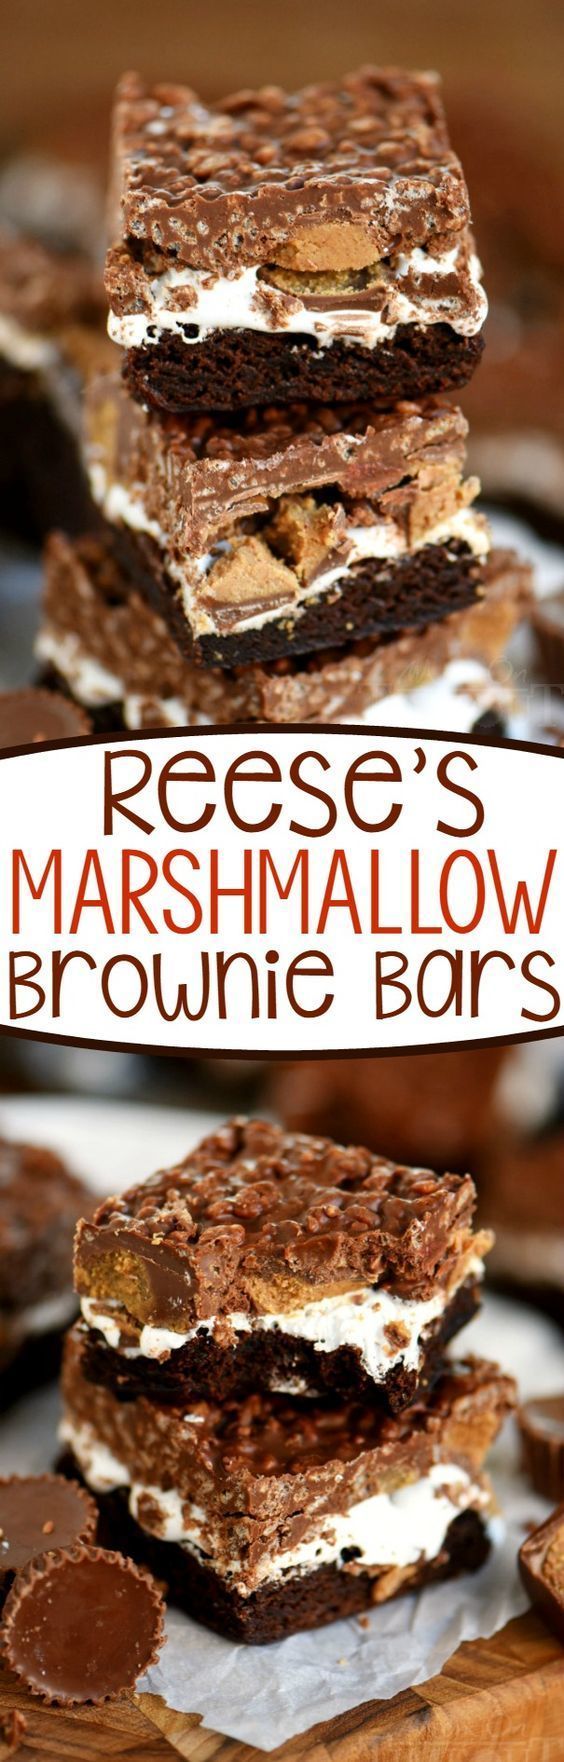 1469092509 14 recipes that use marshmallow besides smores 7